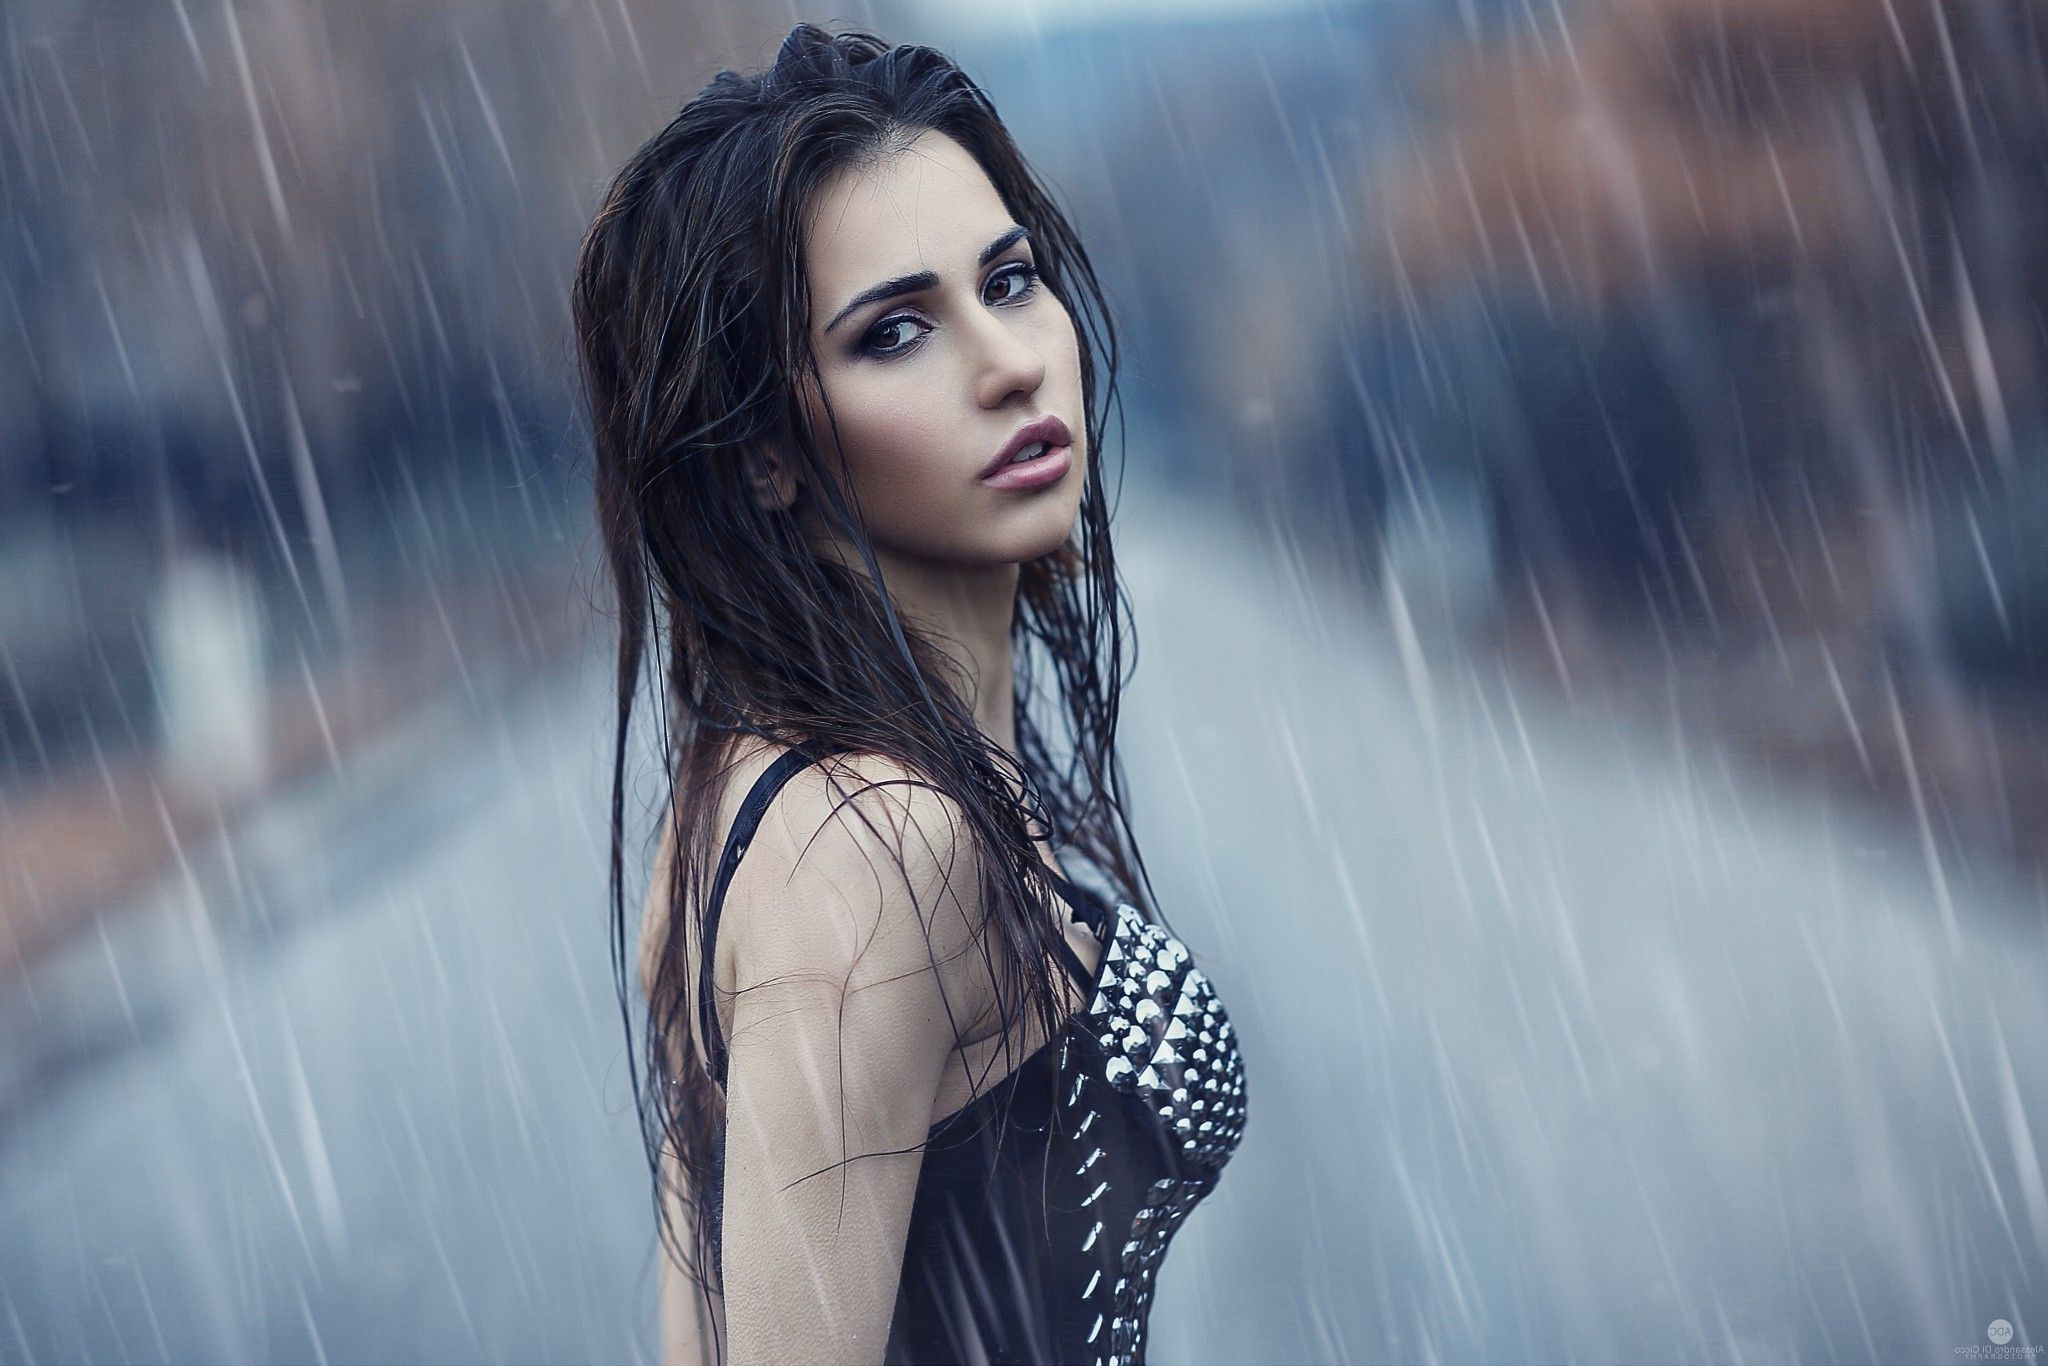 women, Model, Portrait, Looking At Viewer, Rain, Alessandro Di Cicco Wallpaper HD / Desktop and Mobile Background